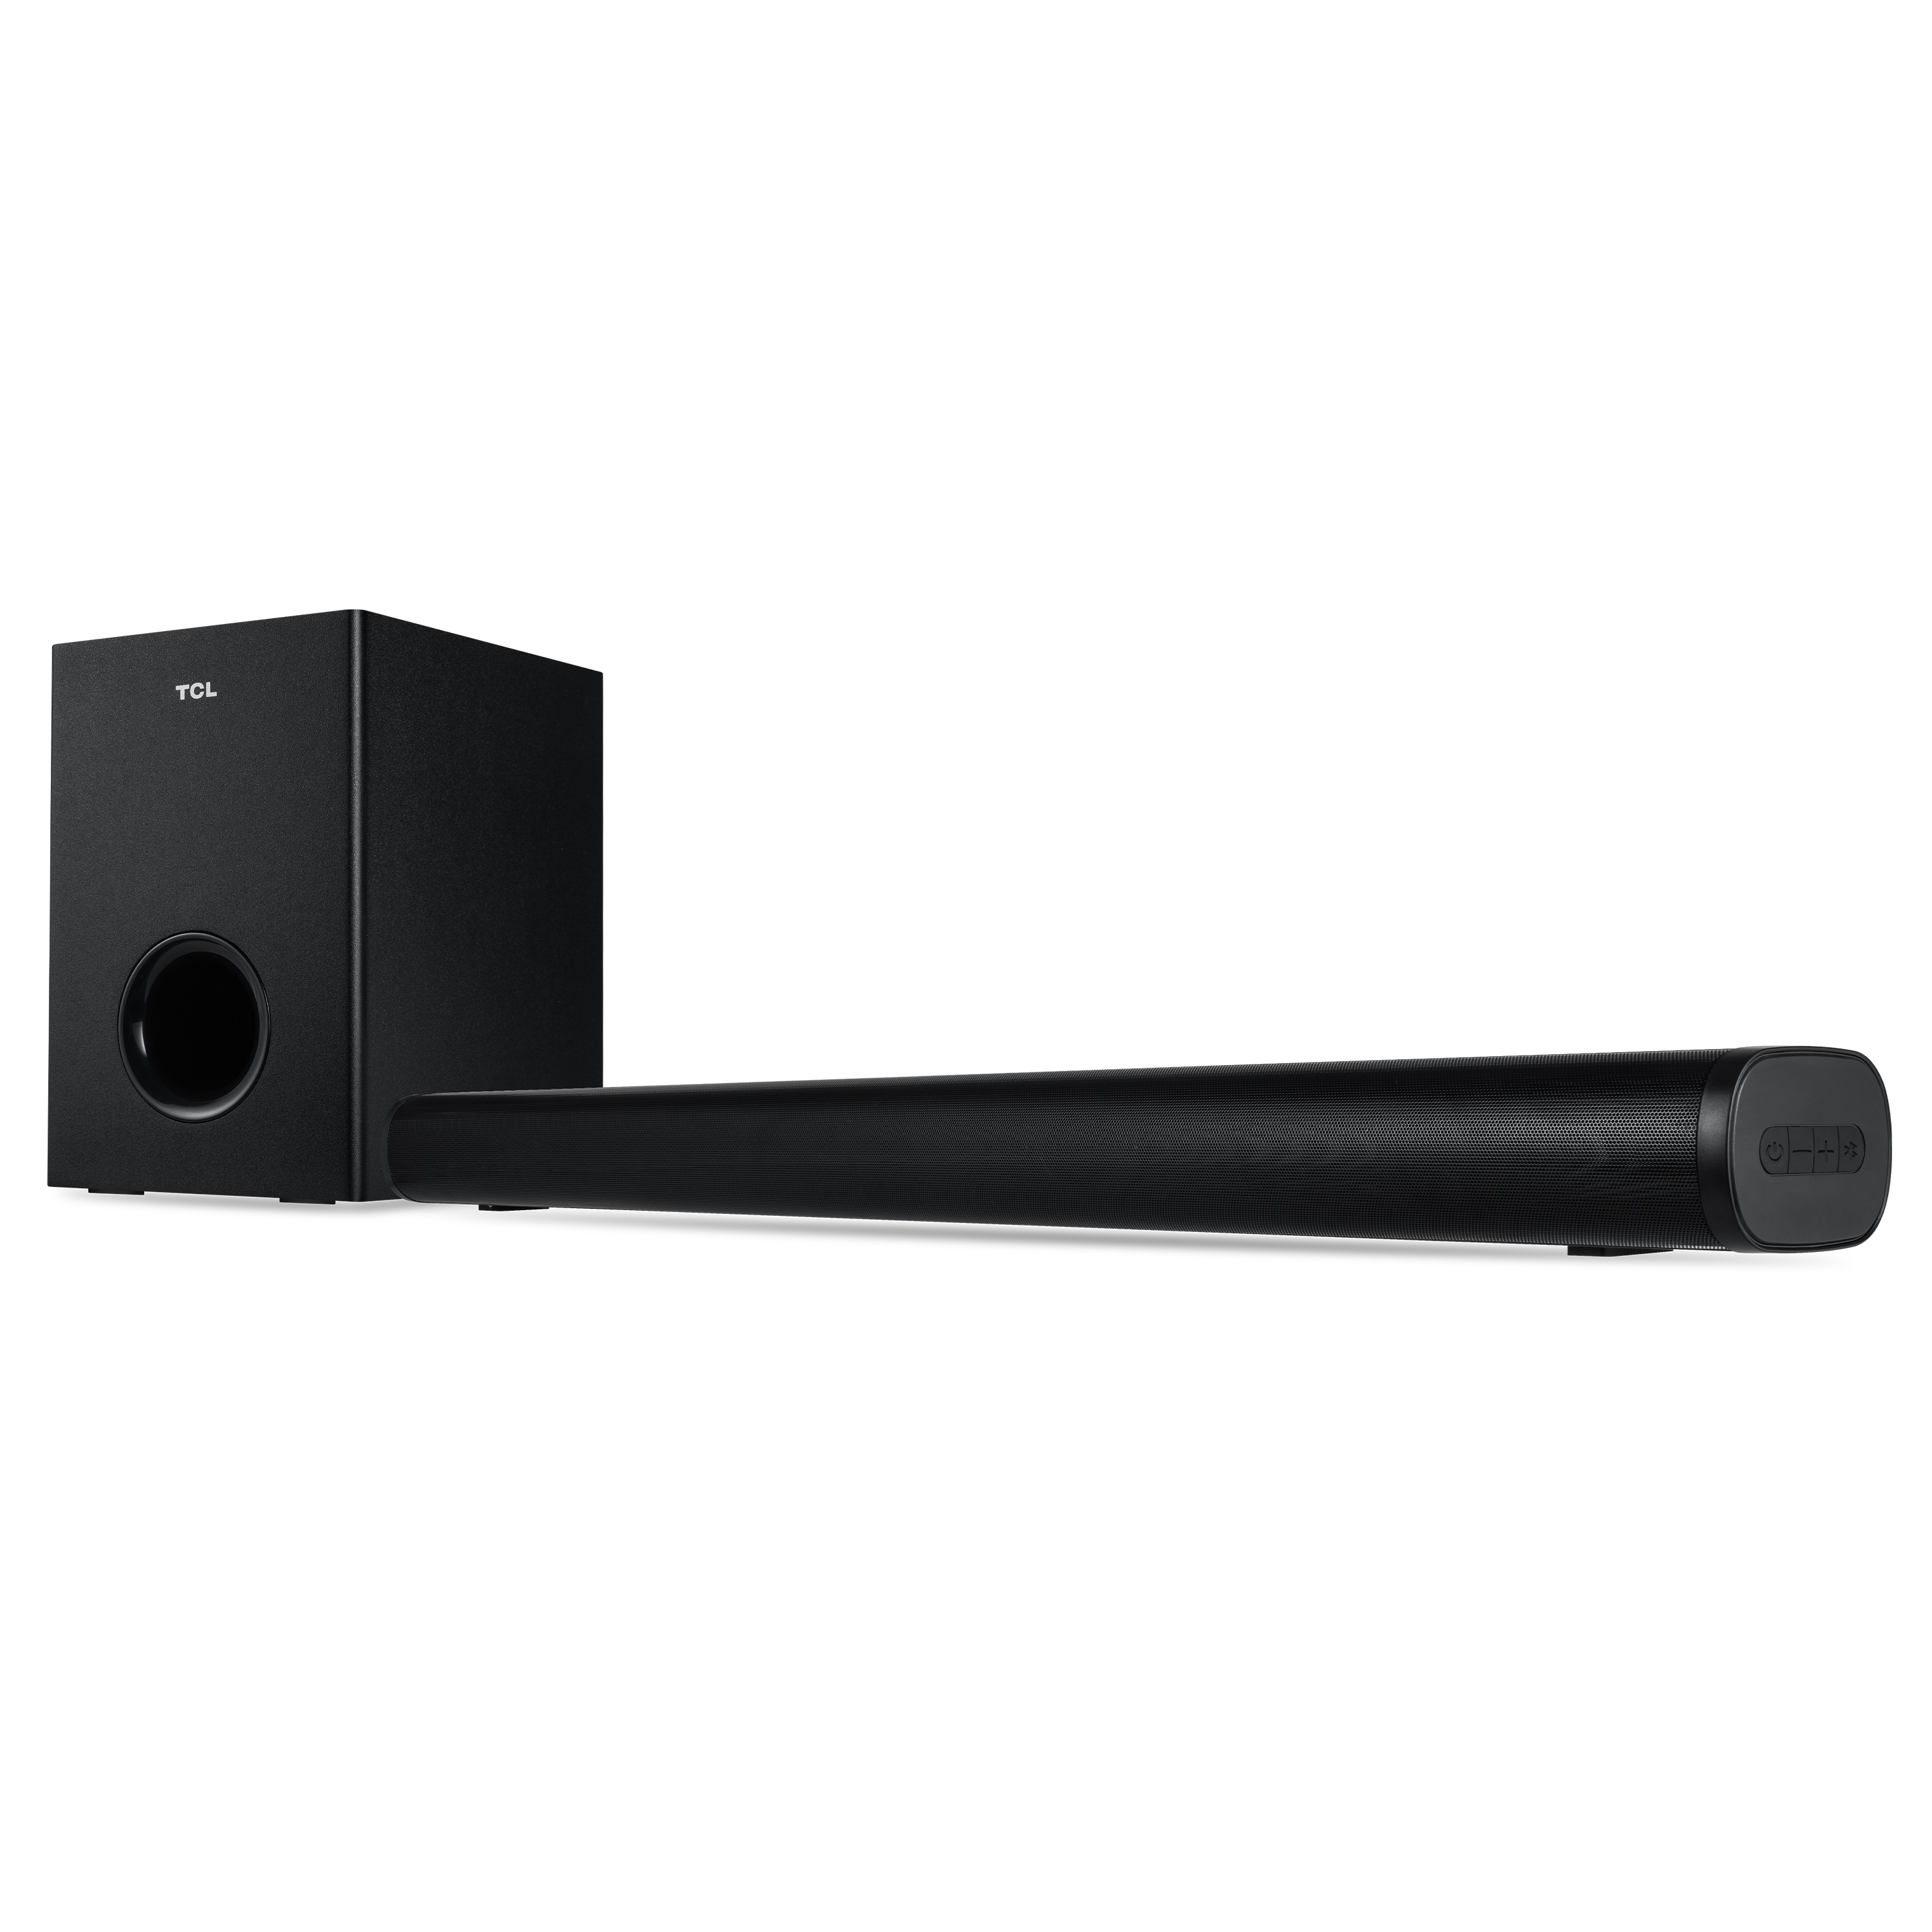 TCL Alto 5+ 2.1 Channel Home Theater Sound Bar with Wireless Subwoofer, Bluetooth 5.0, 31.8 inch, Black - S522W - image 3 of 5